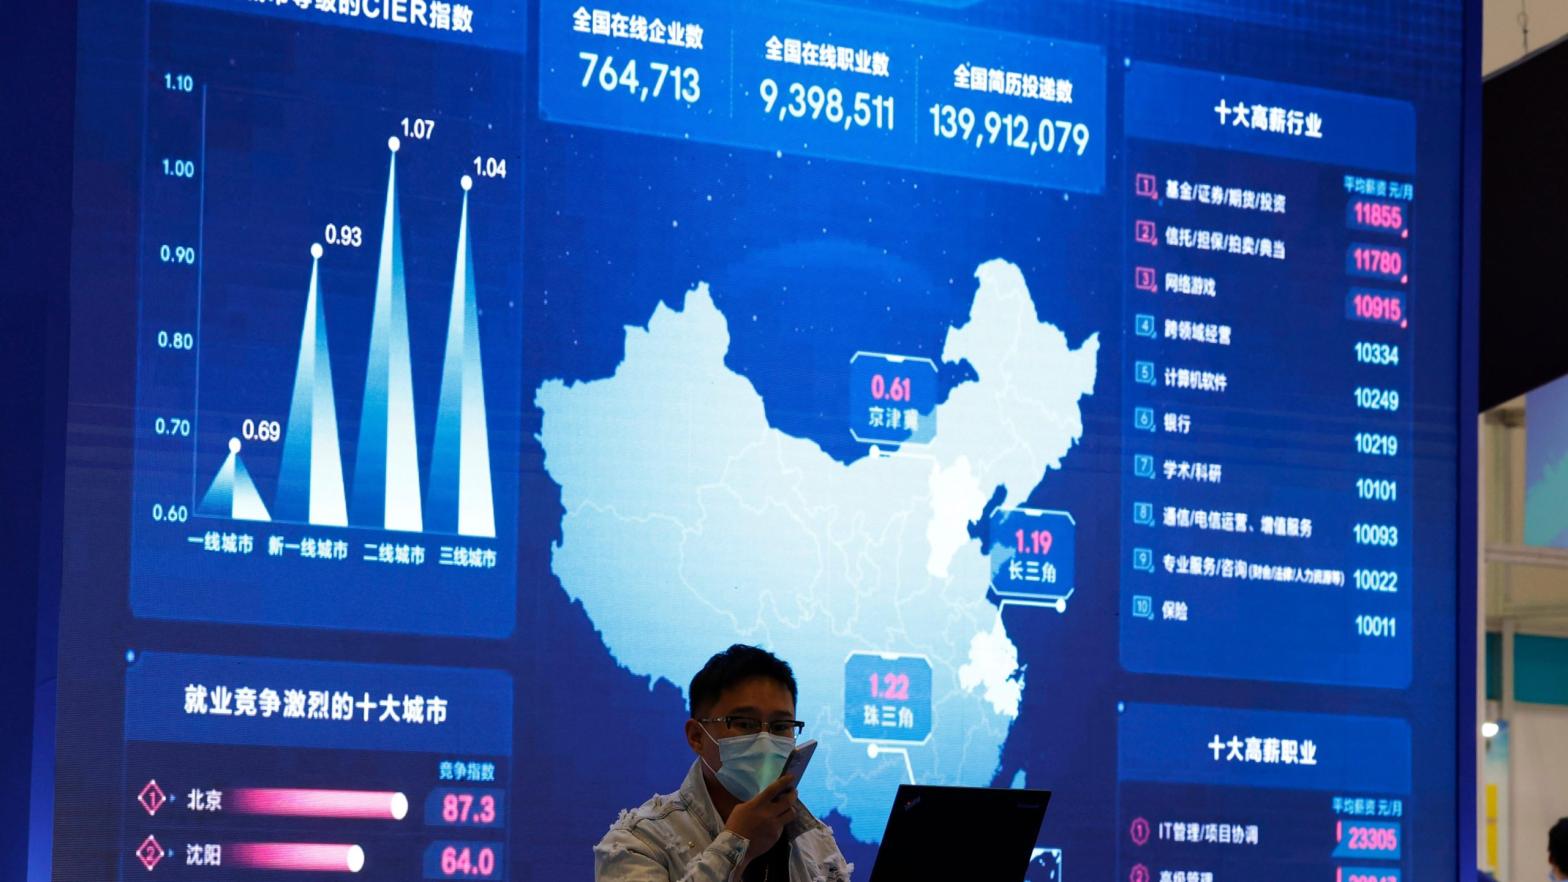 A man stands in front of a large screen showing analytics data about the Chinese web at an internet fair in Beijing in April 2021; used here as stock photo. (Photo: Ng Han Guan, AP)